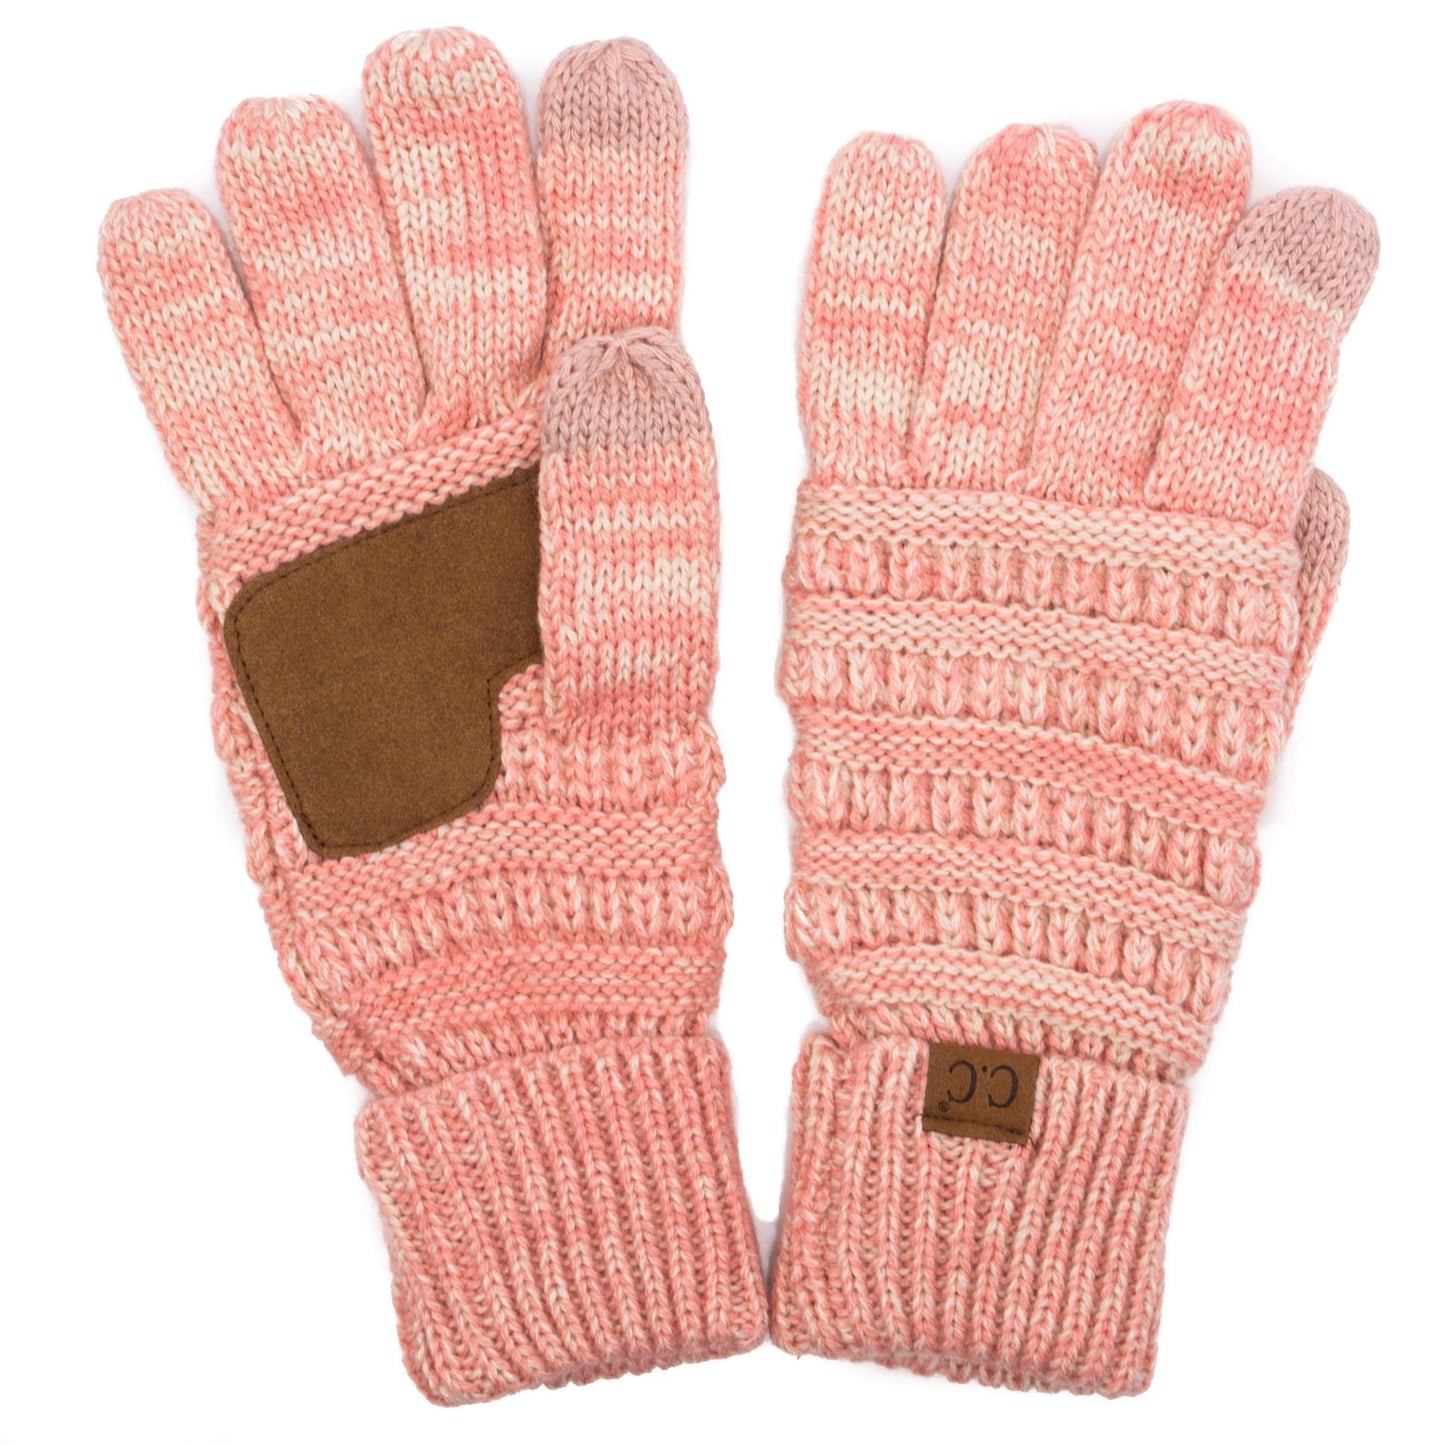 C.C Apparel C.C Unisex Cable Knit Winter Warm Anti-Slip Two-Toned Touchscreen Texting Gloves